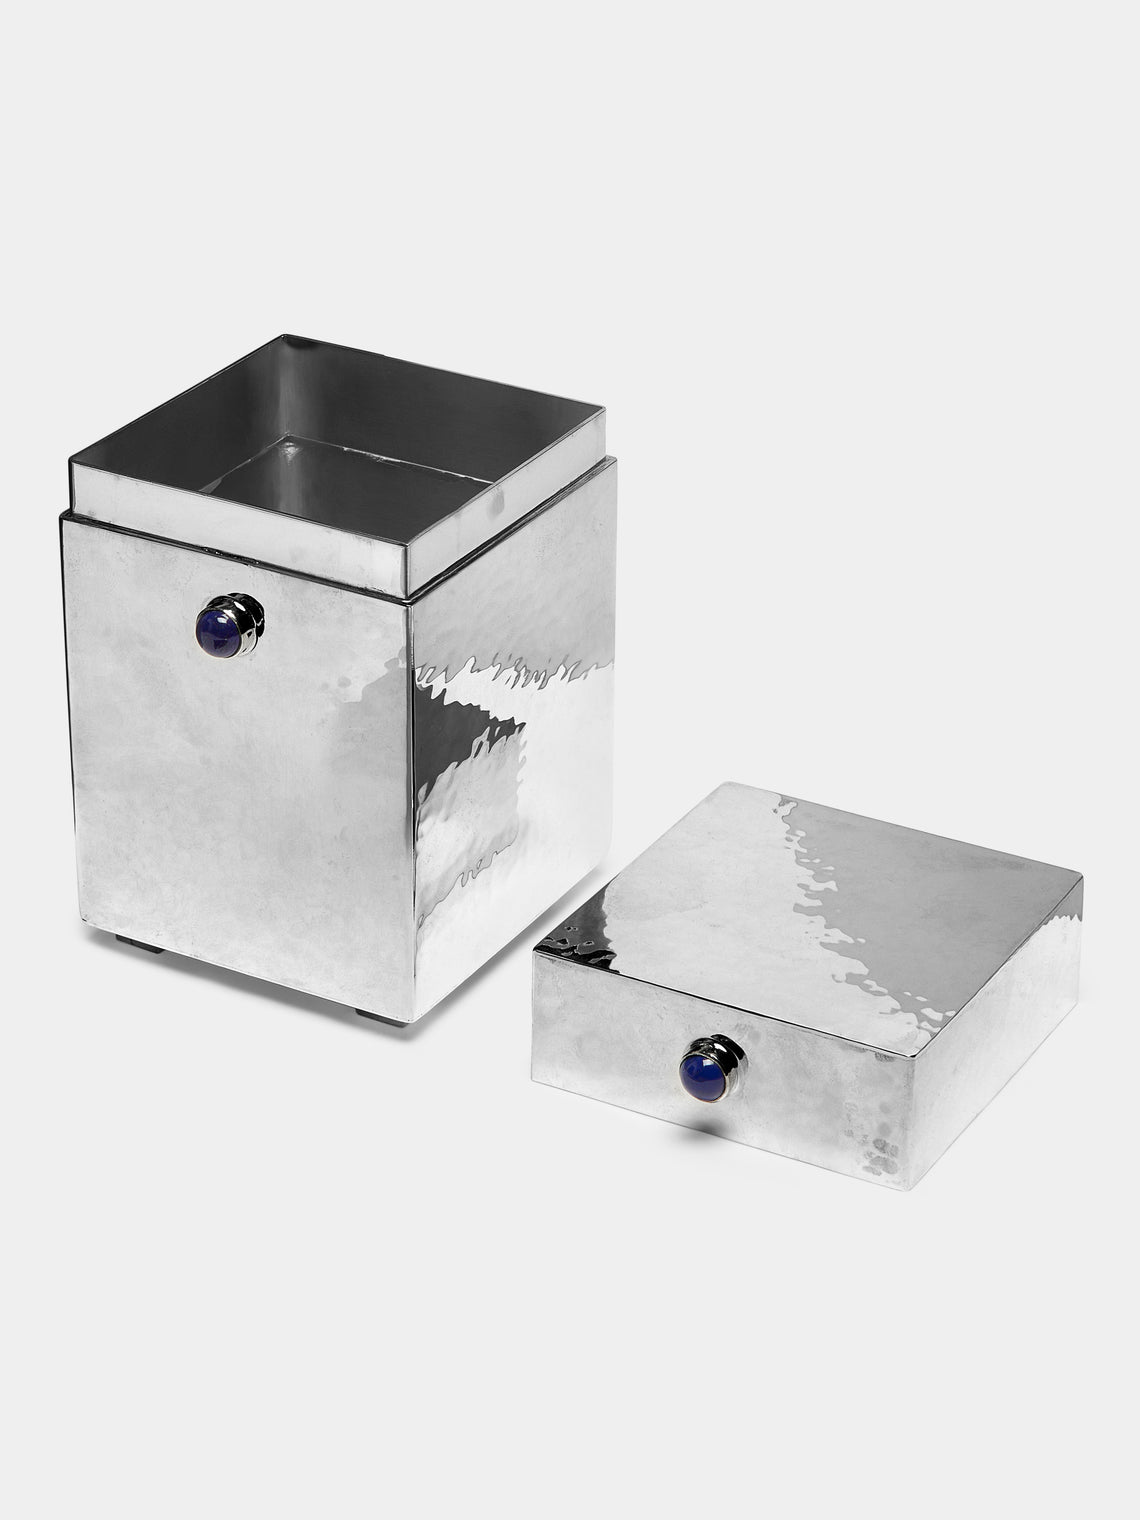 Wiener Silber Manufactur - Sterling Silver and Lapis Lazuli Cigarette Box - Silver - ABASK